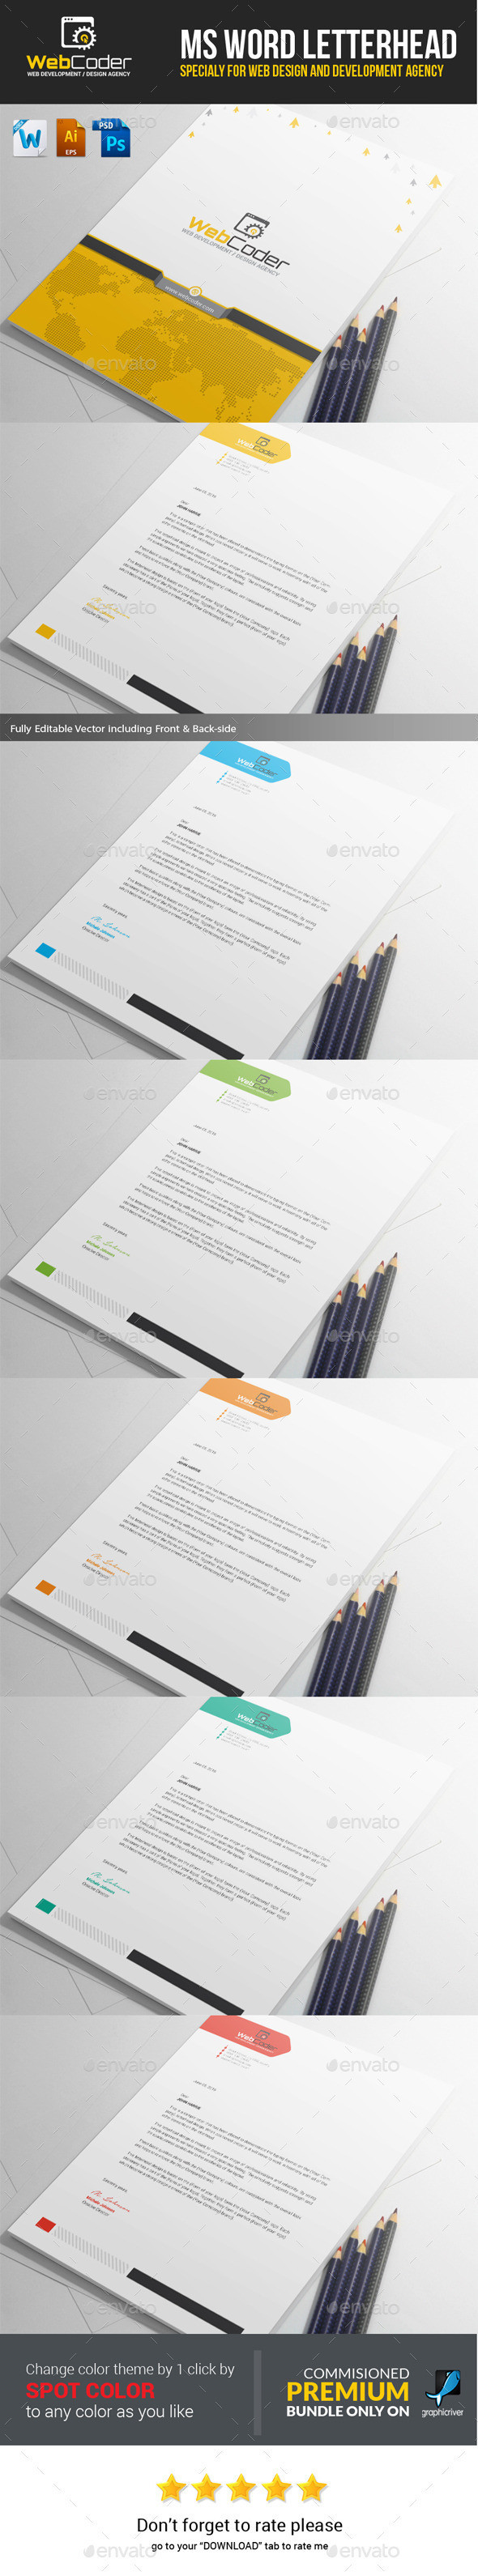 Web coder web design and web development agency company ms word letterhead template image preview